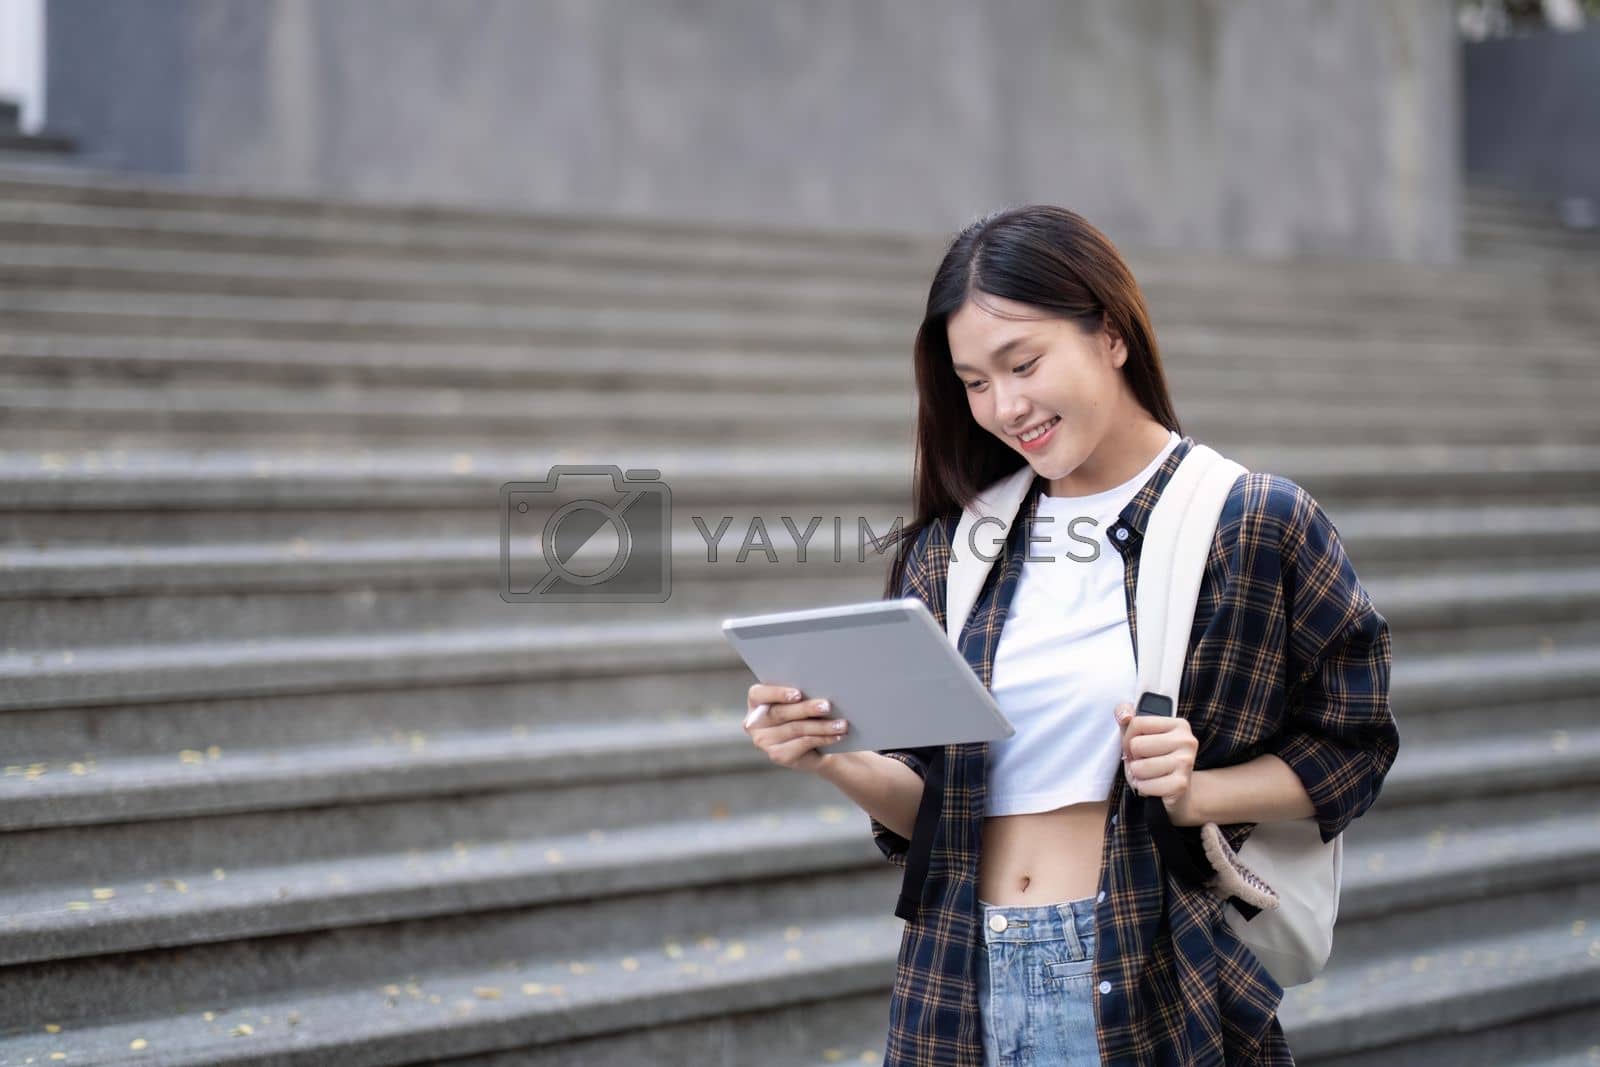 Royalty free image of Asian female college student with her laptop in front of the campus building by nateemee